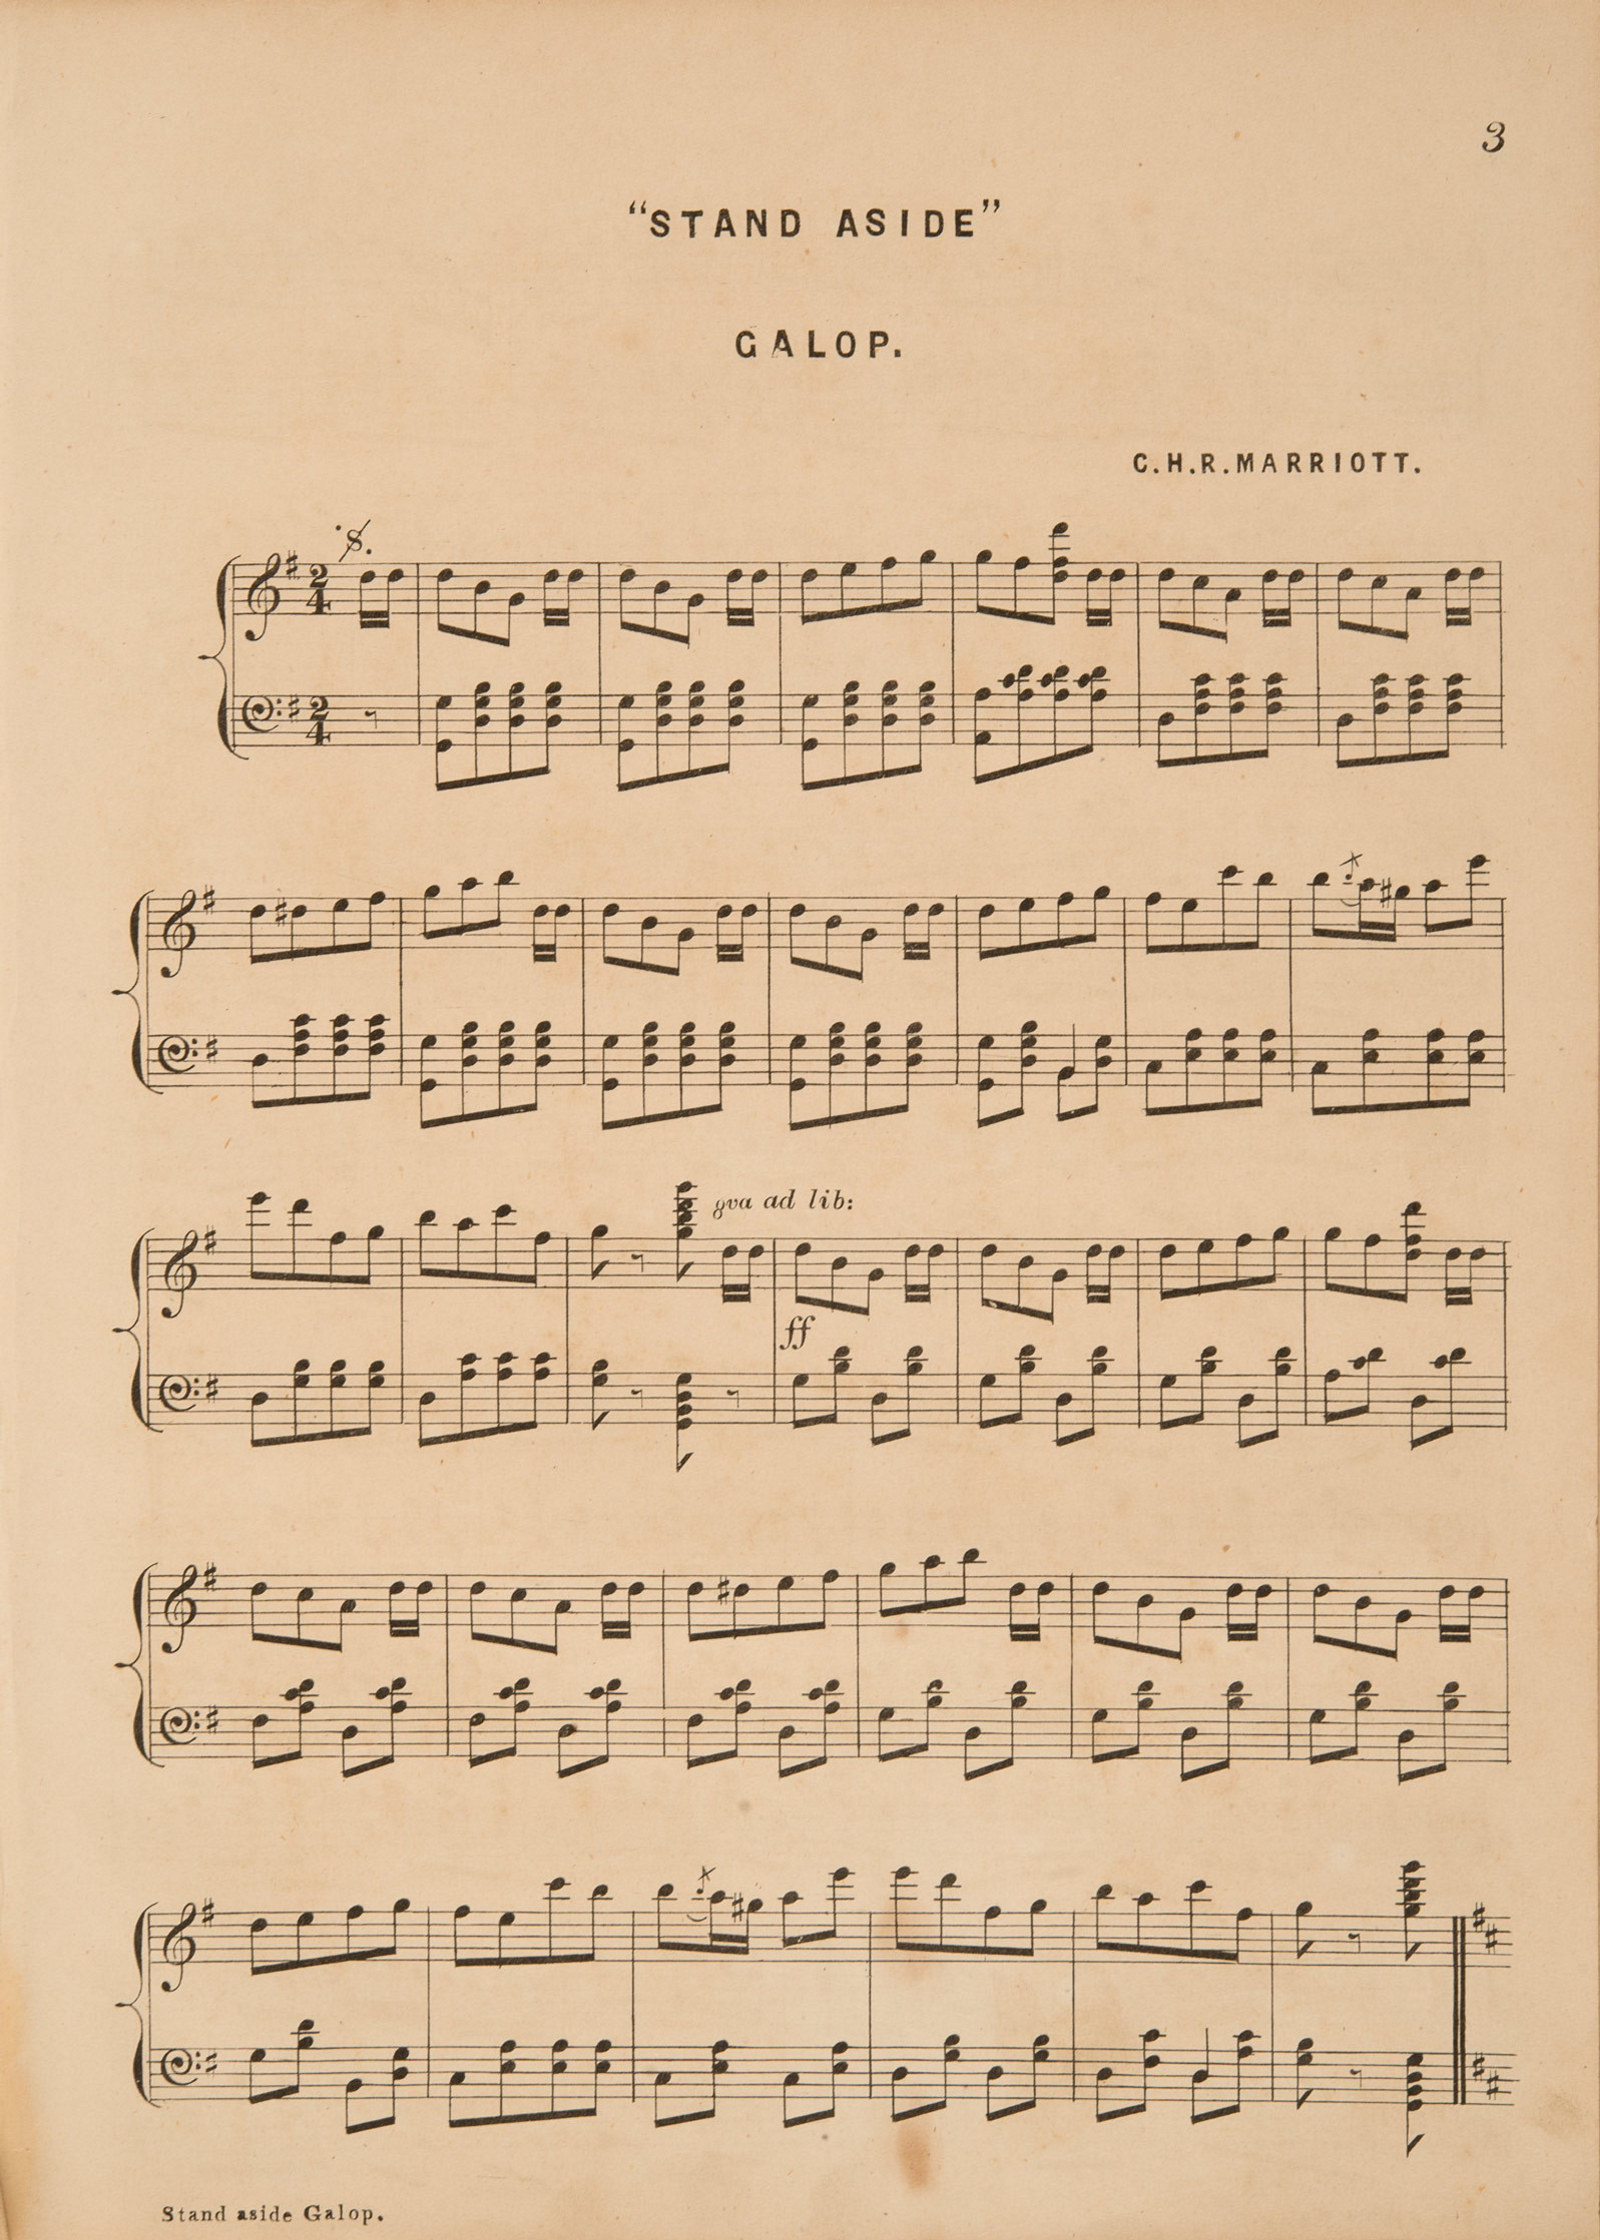 Sheet music, 'Stand Aside', by C. H. R. Marriott, circa 1860s